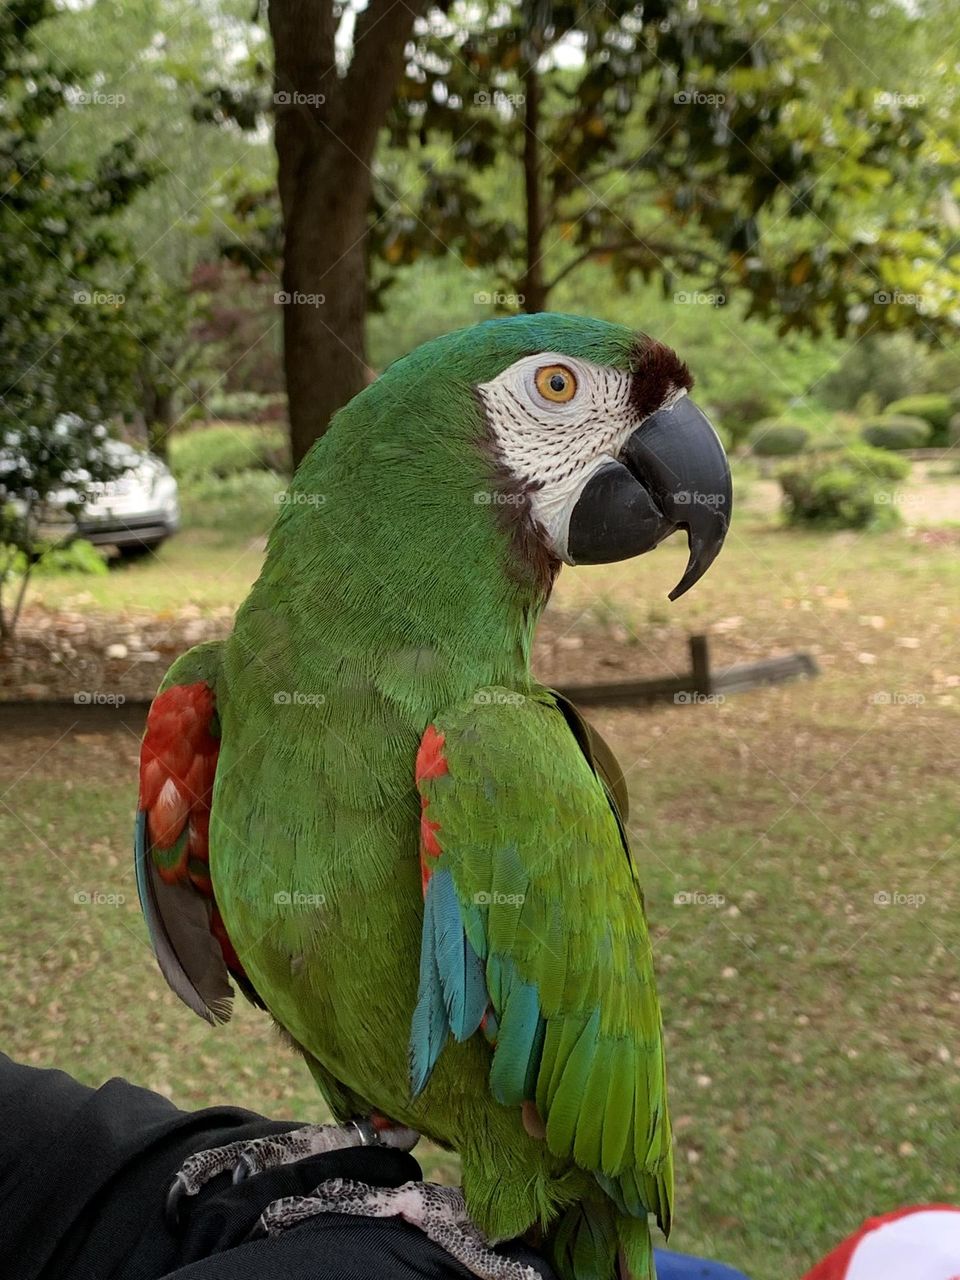 Colorful Macaw - The chestnut-fronted macaw or severe macaw is one of the largest of the mini-macaws. It reaches a size of around 45 cm of which around half is the length of the tail.